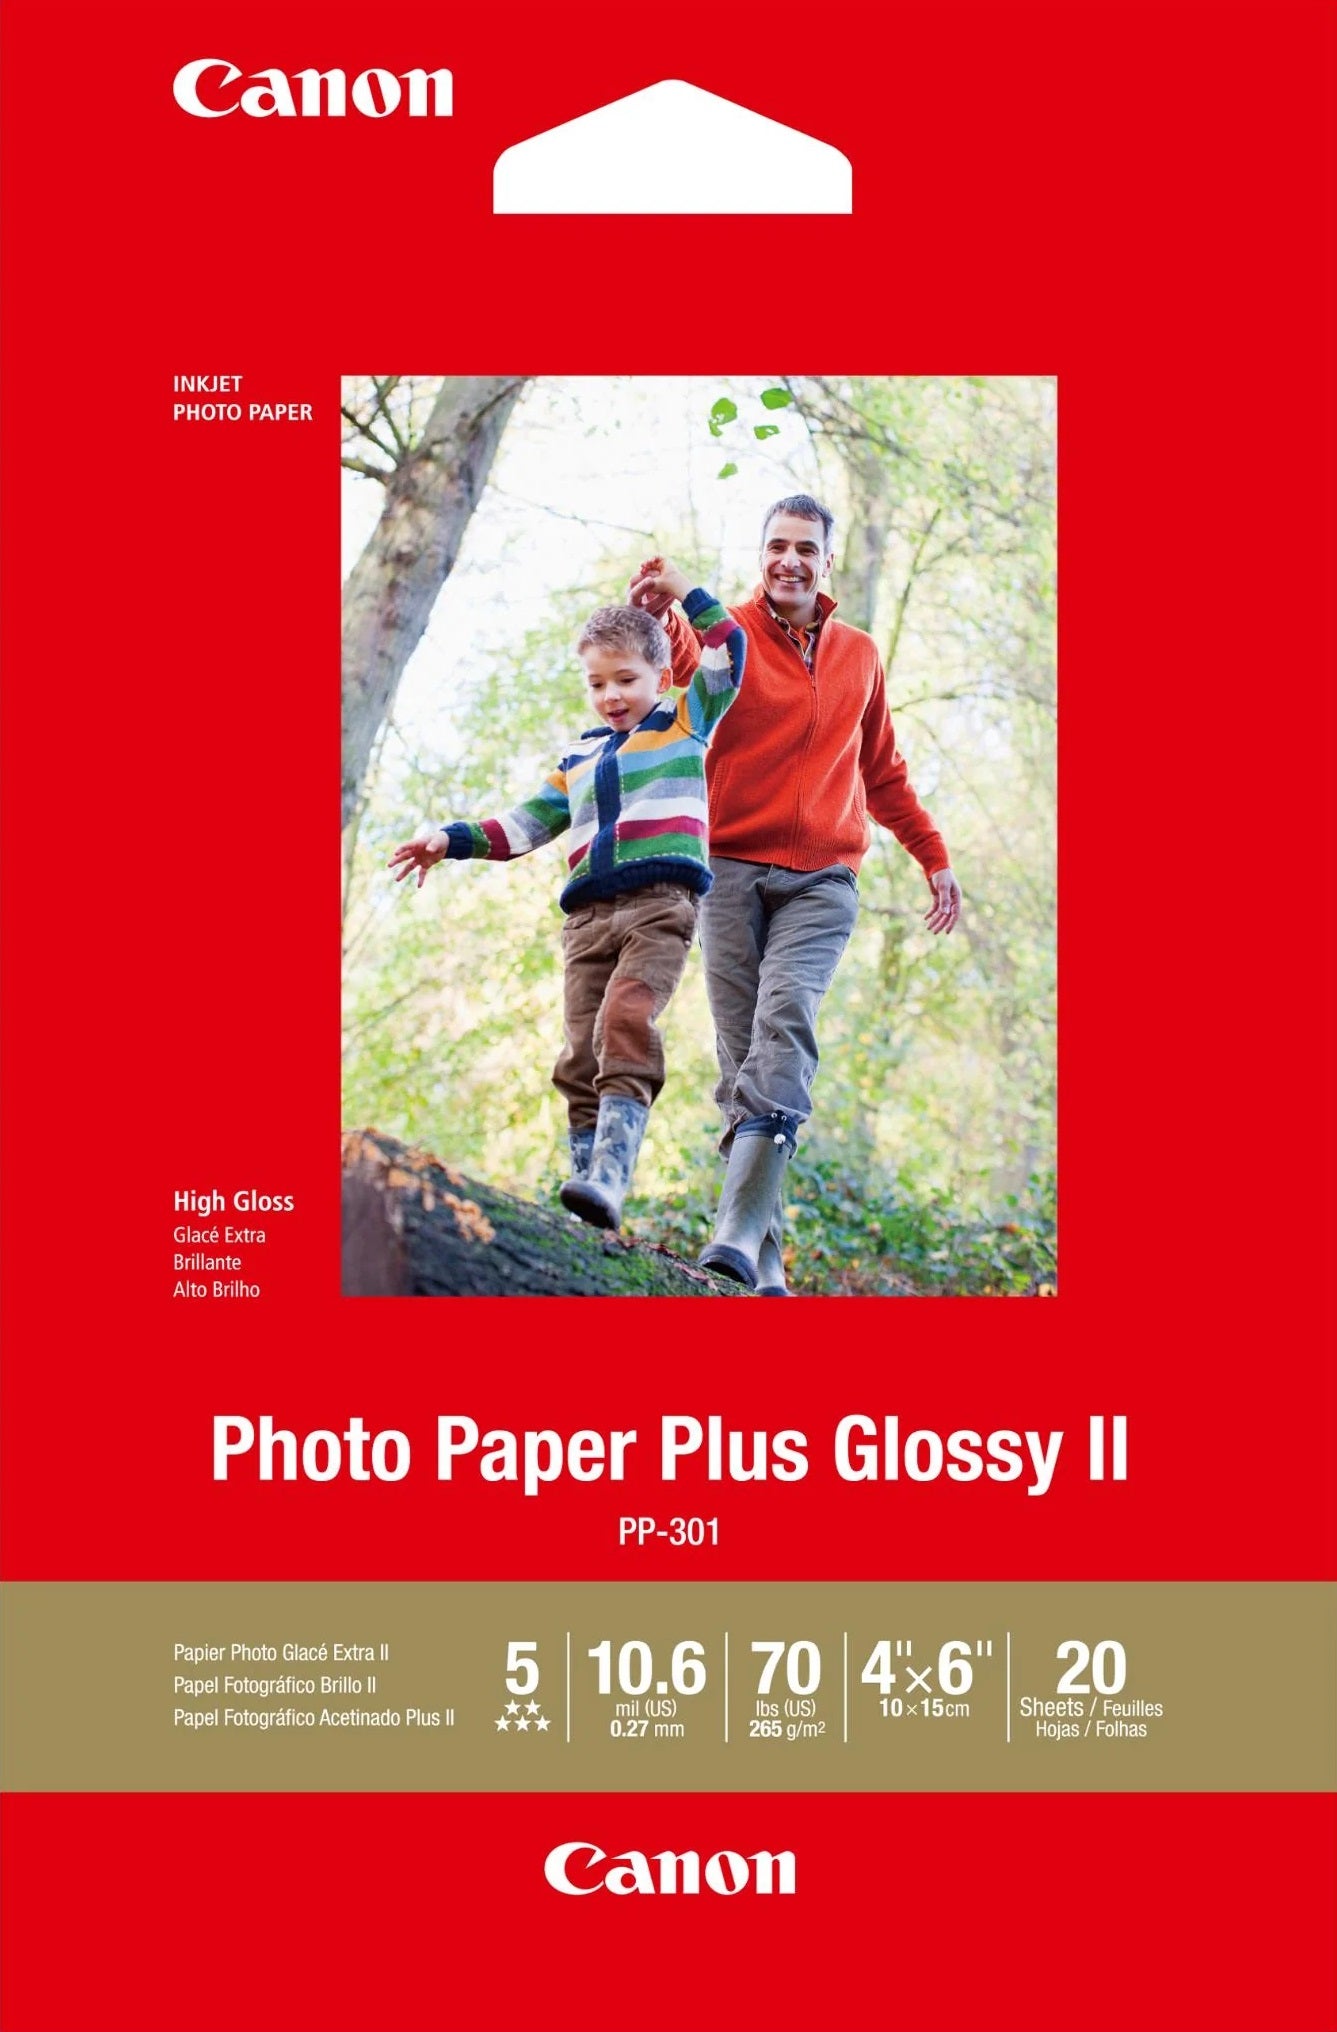 4x6 265gsm Canon Photo Paper Plus Glossy II 20 sheets